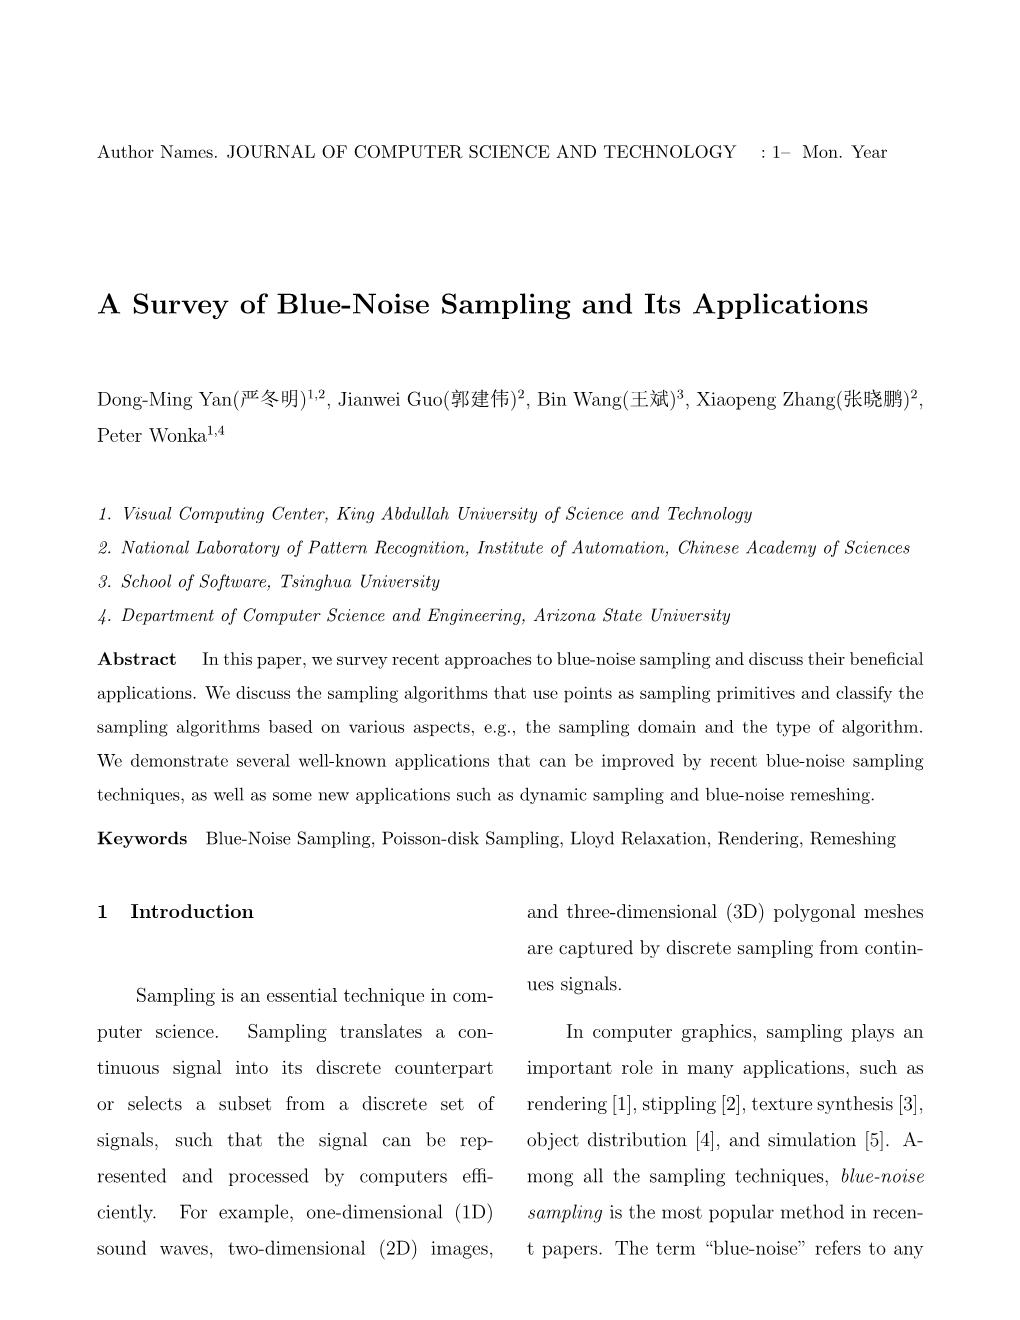 A Survey of Blue-Noise Sampling and Its Applications